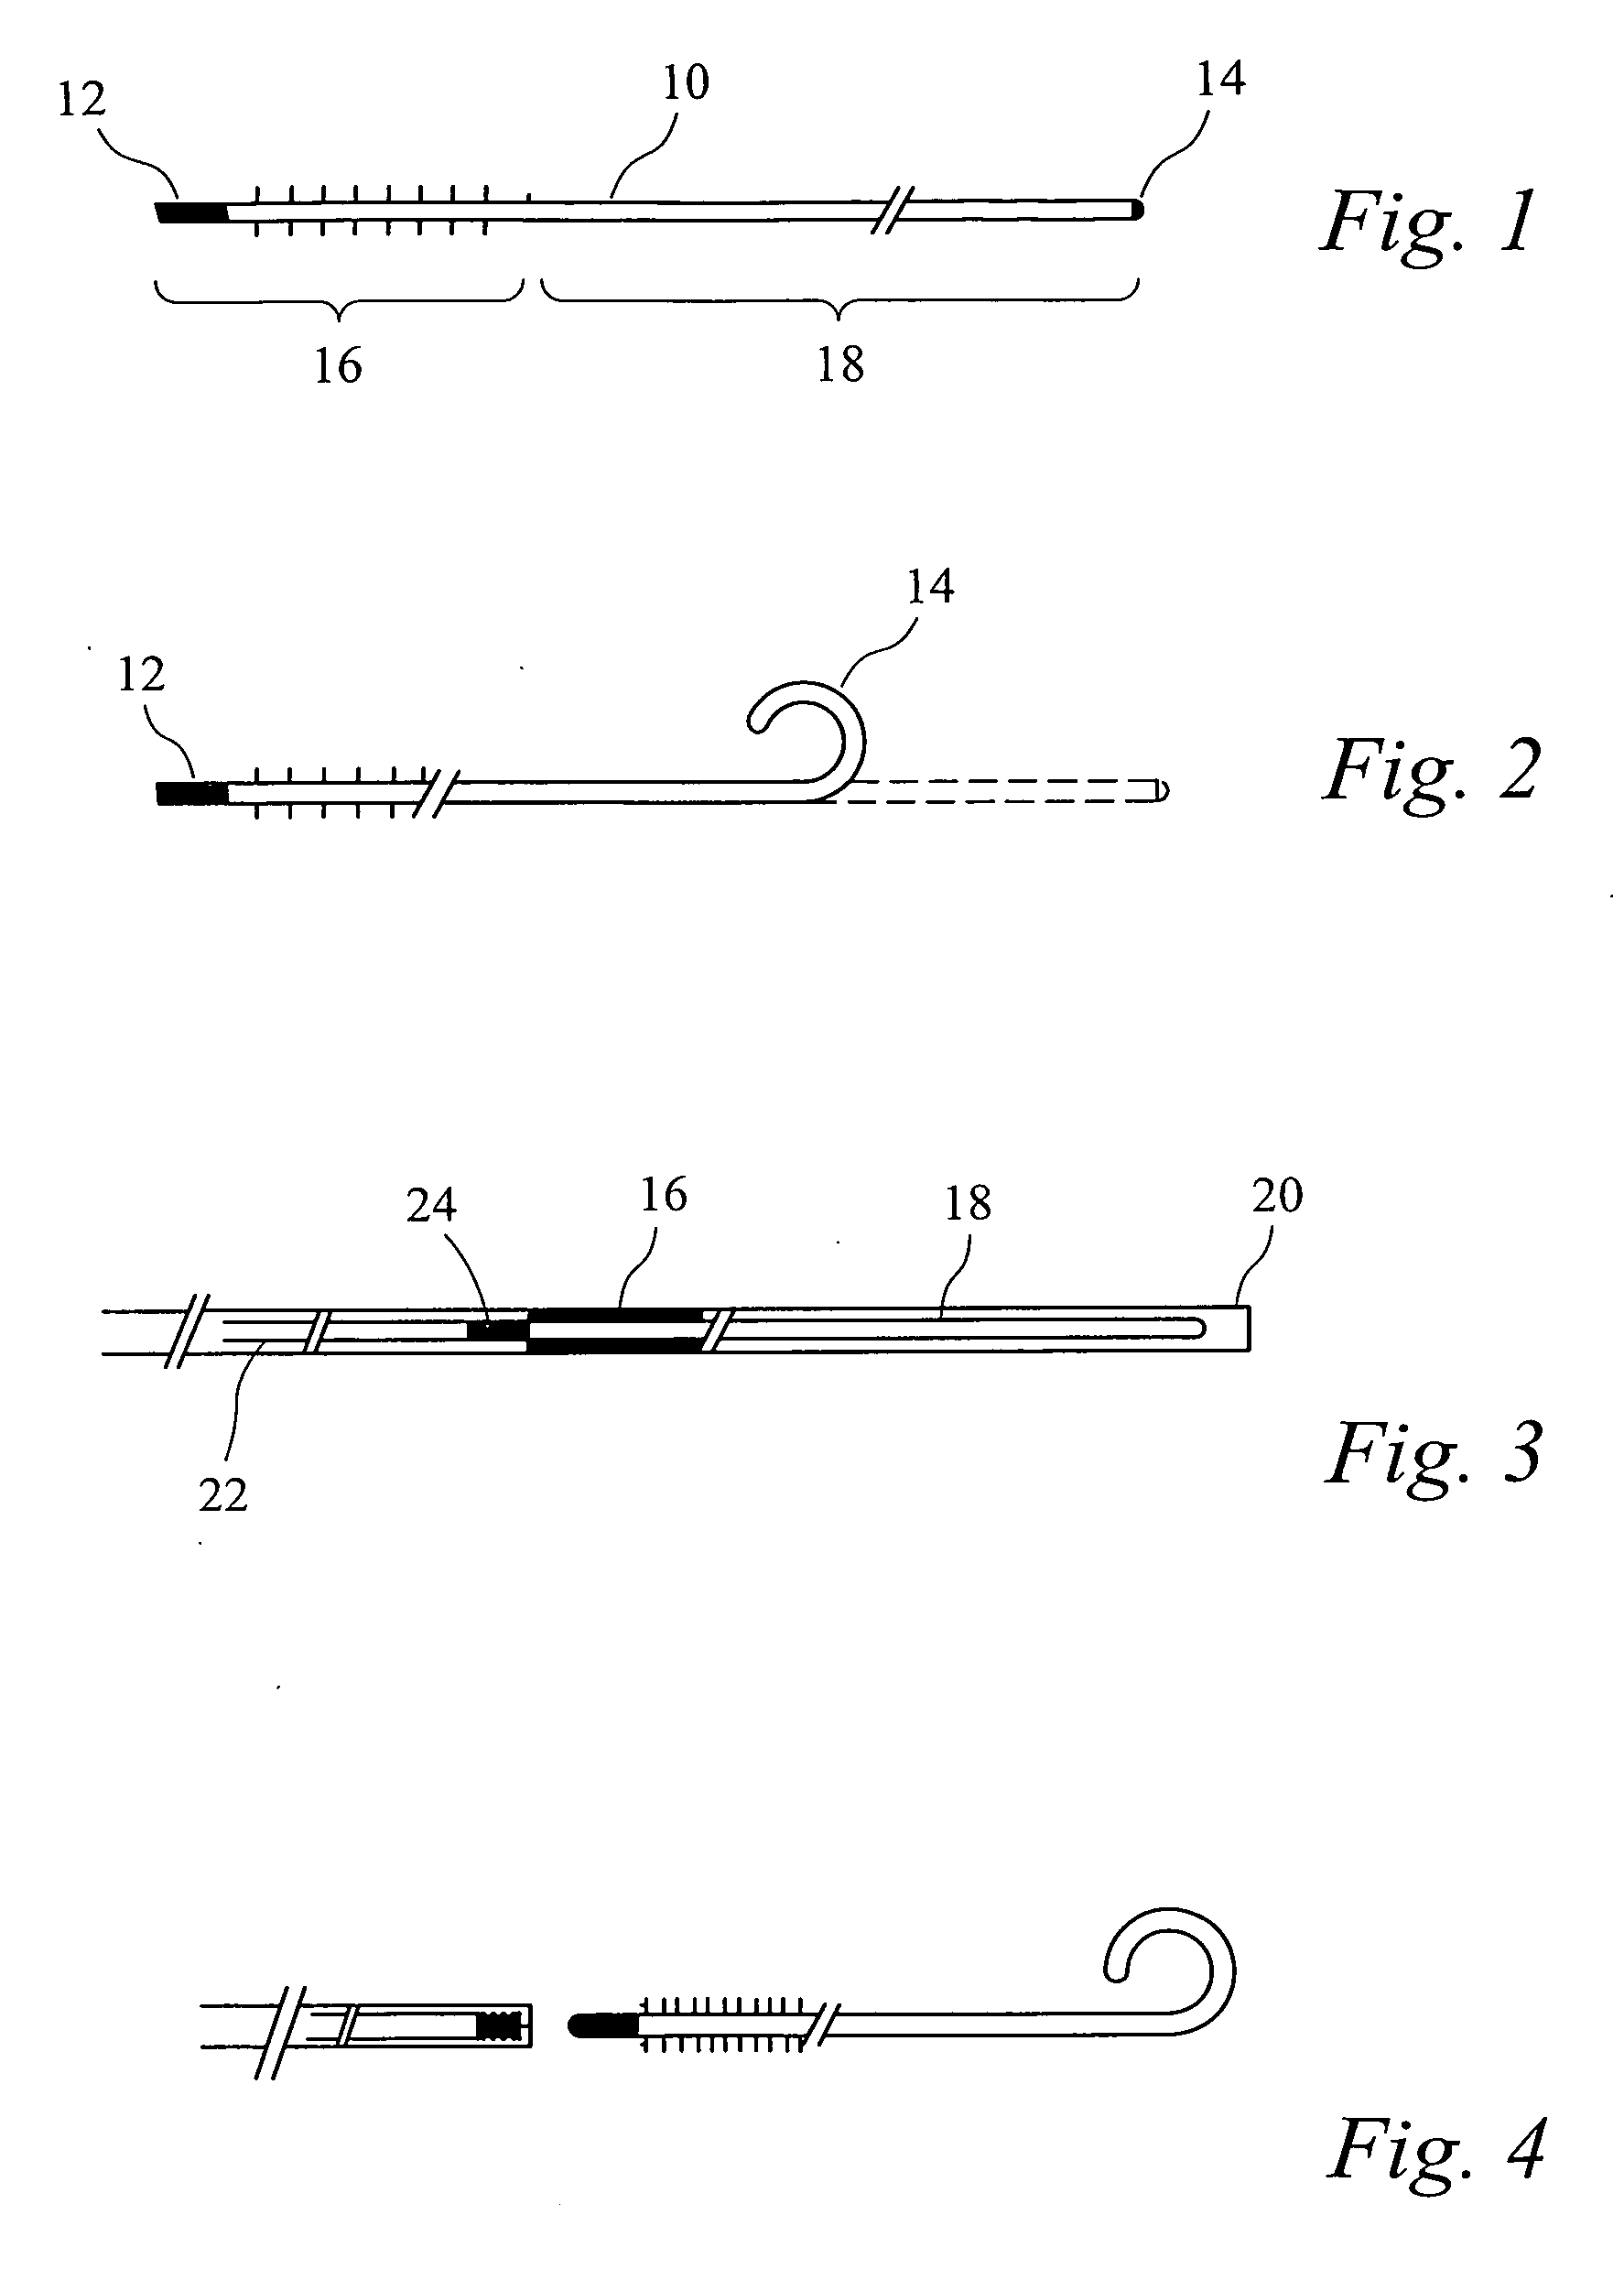 Embolization coil and delivery system